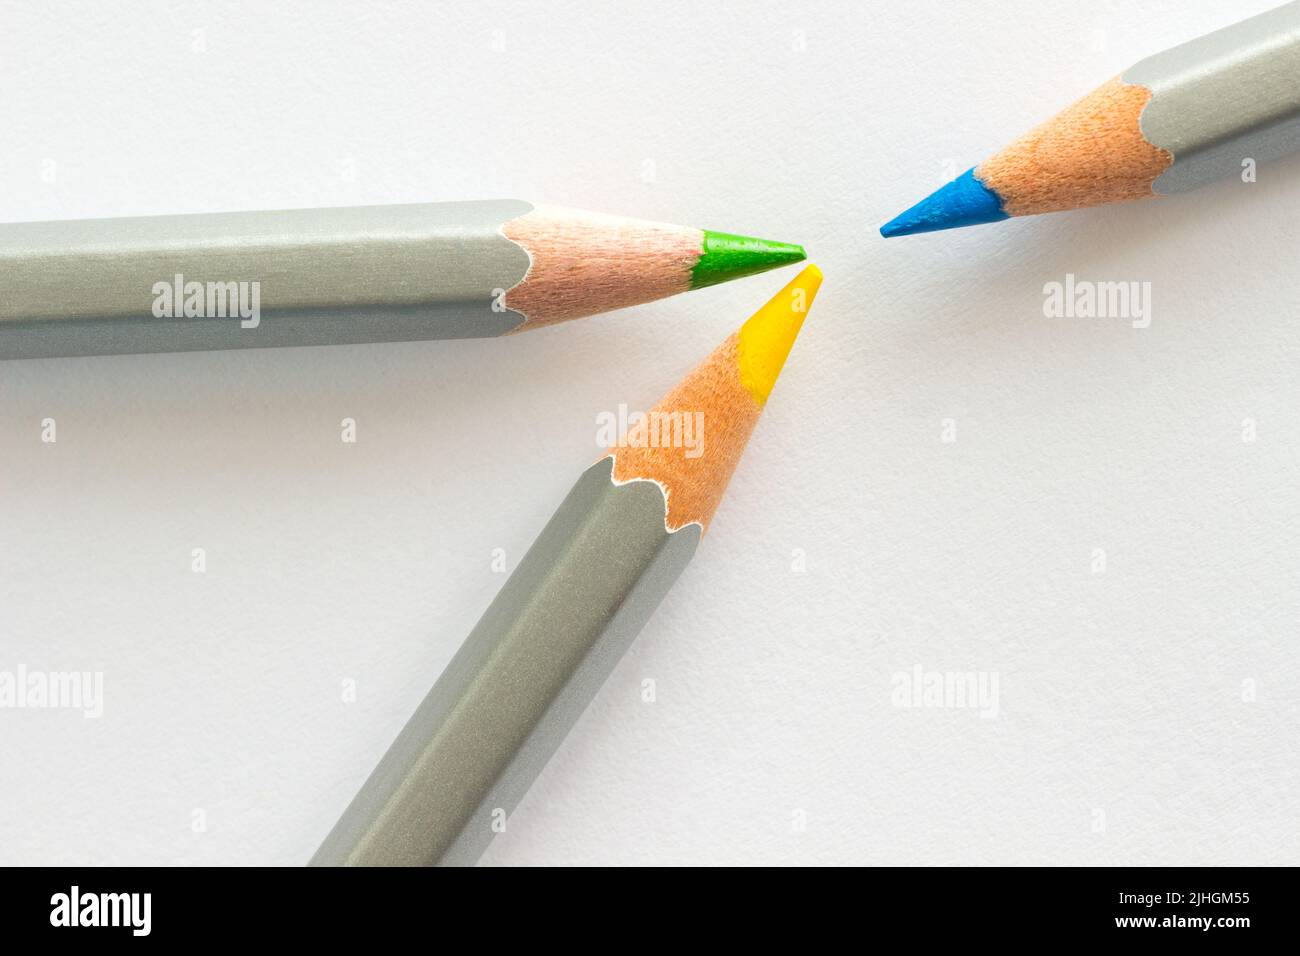 Three slate pencils with an eraser on a white background 19824559